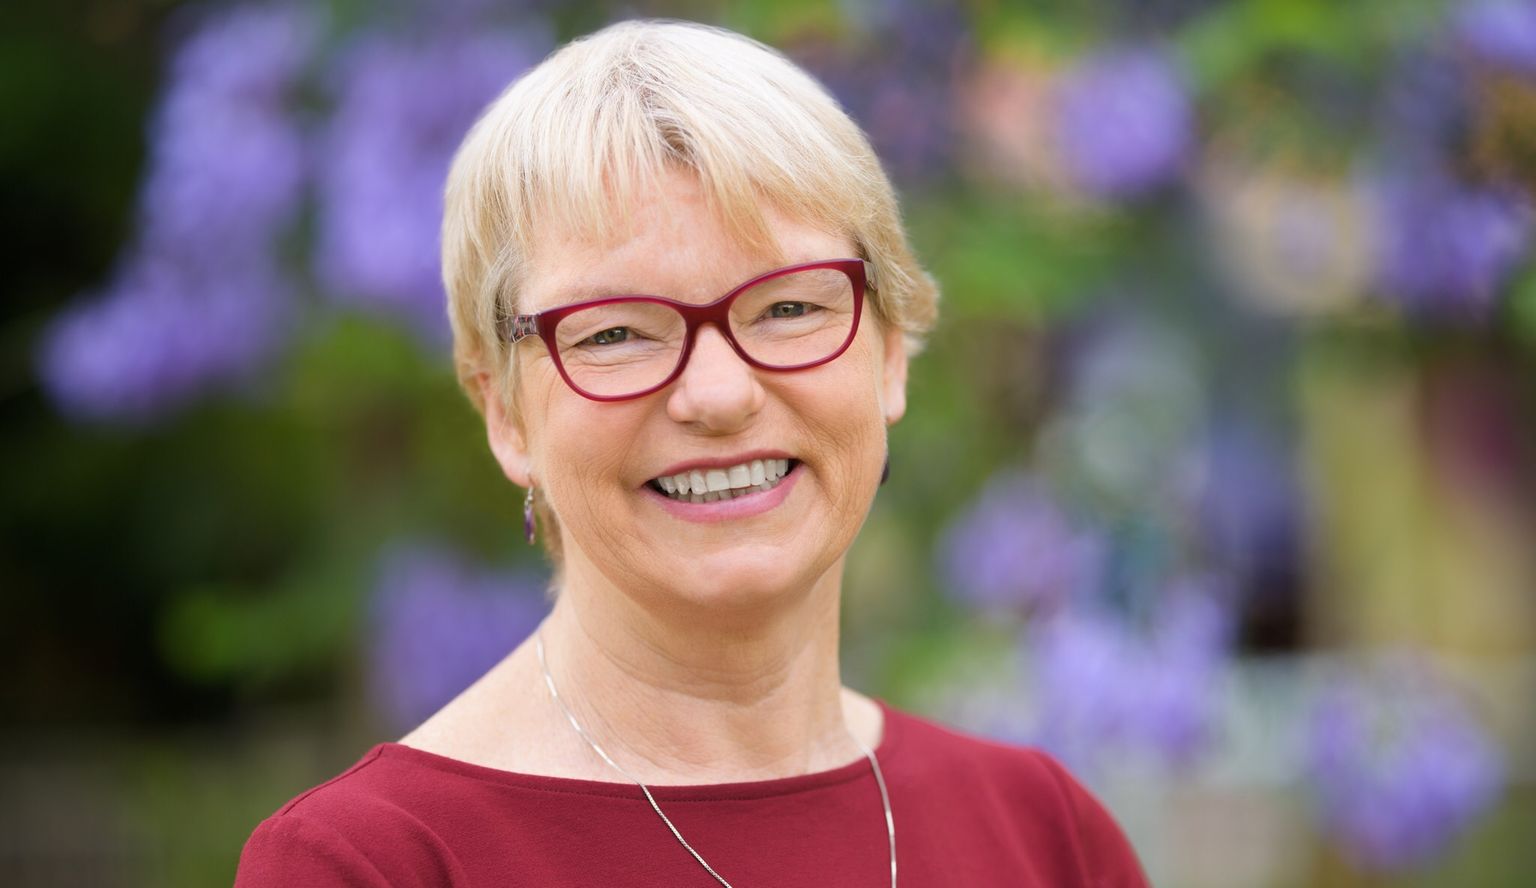 ‘For my family and me, today’s celebration of marriage equality is personal’: Janet Rice